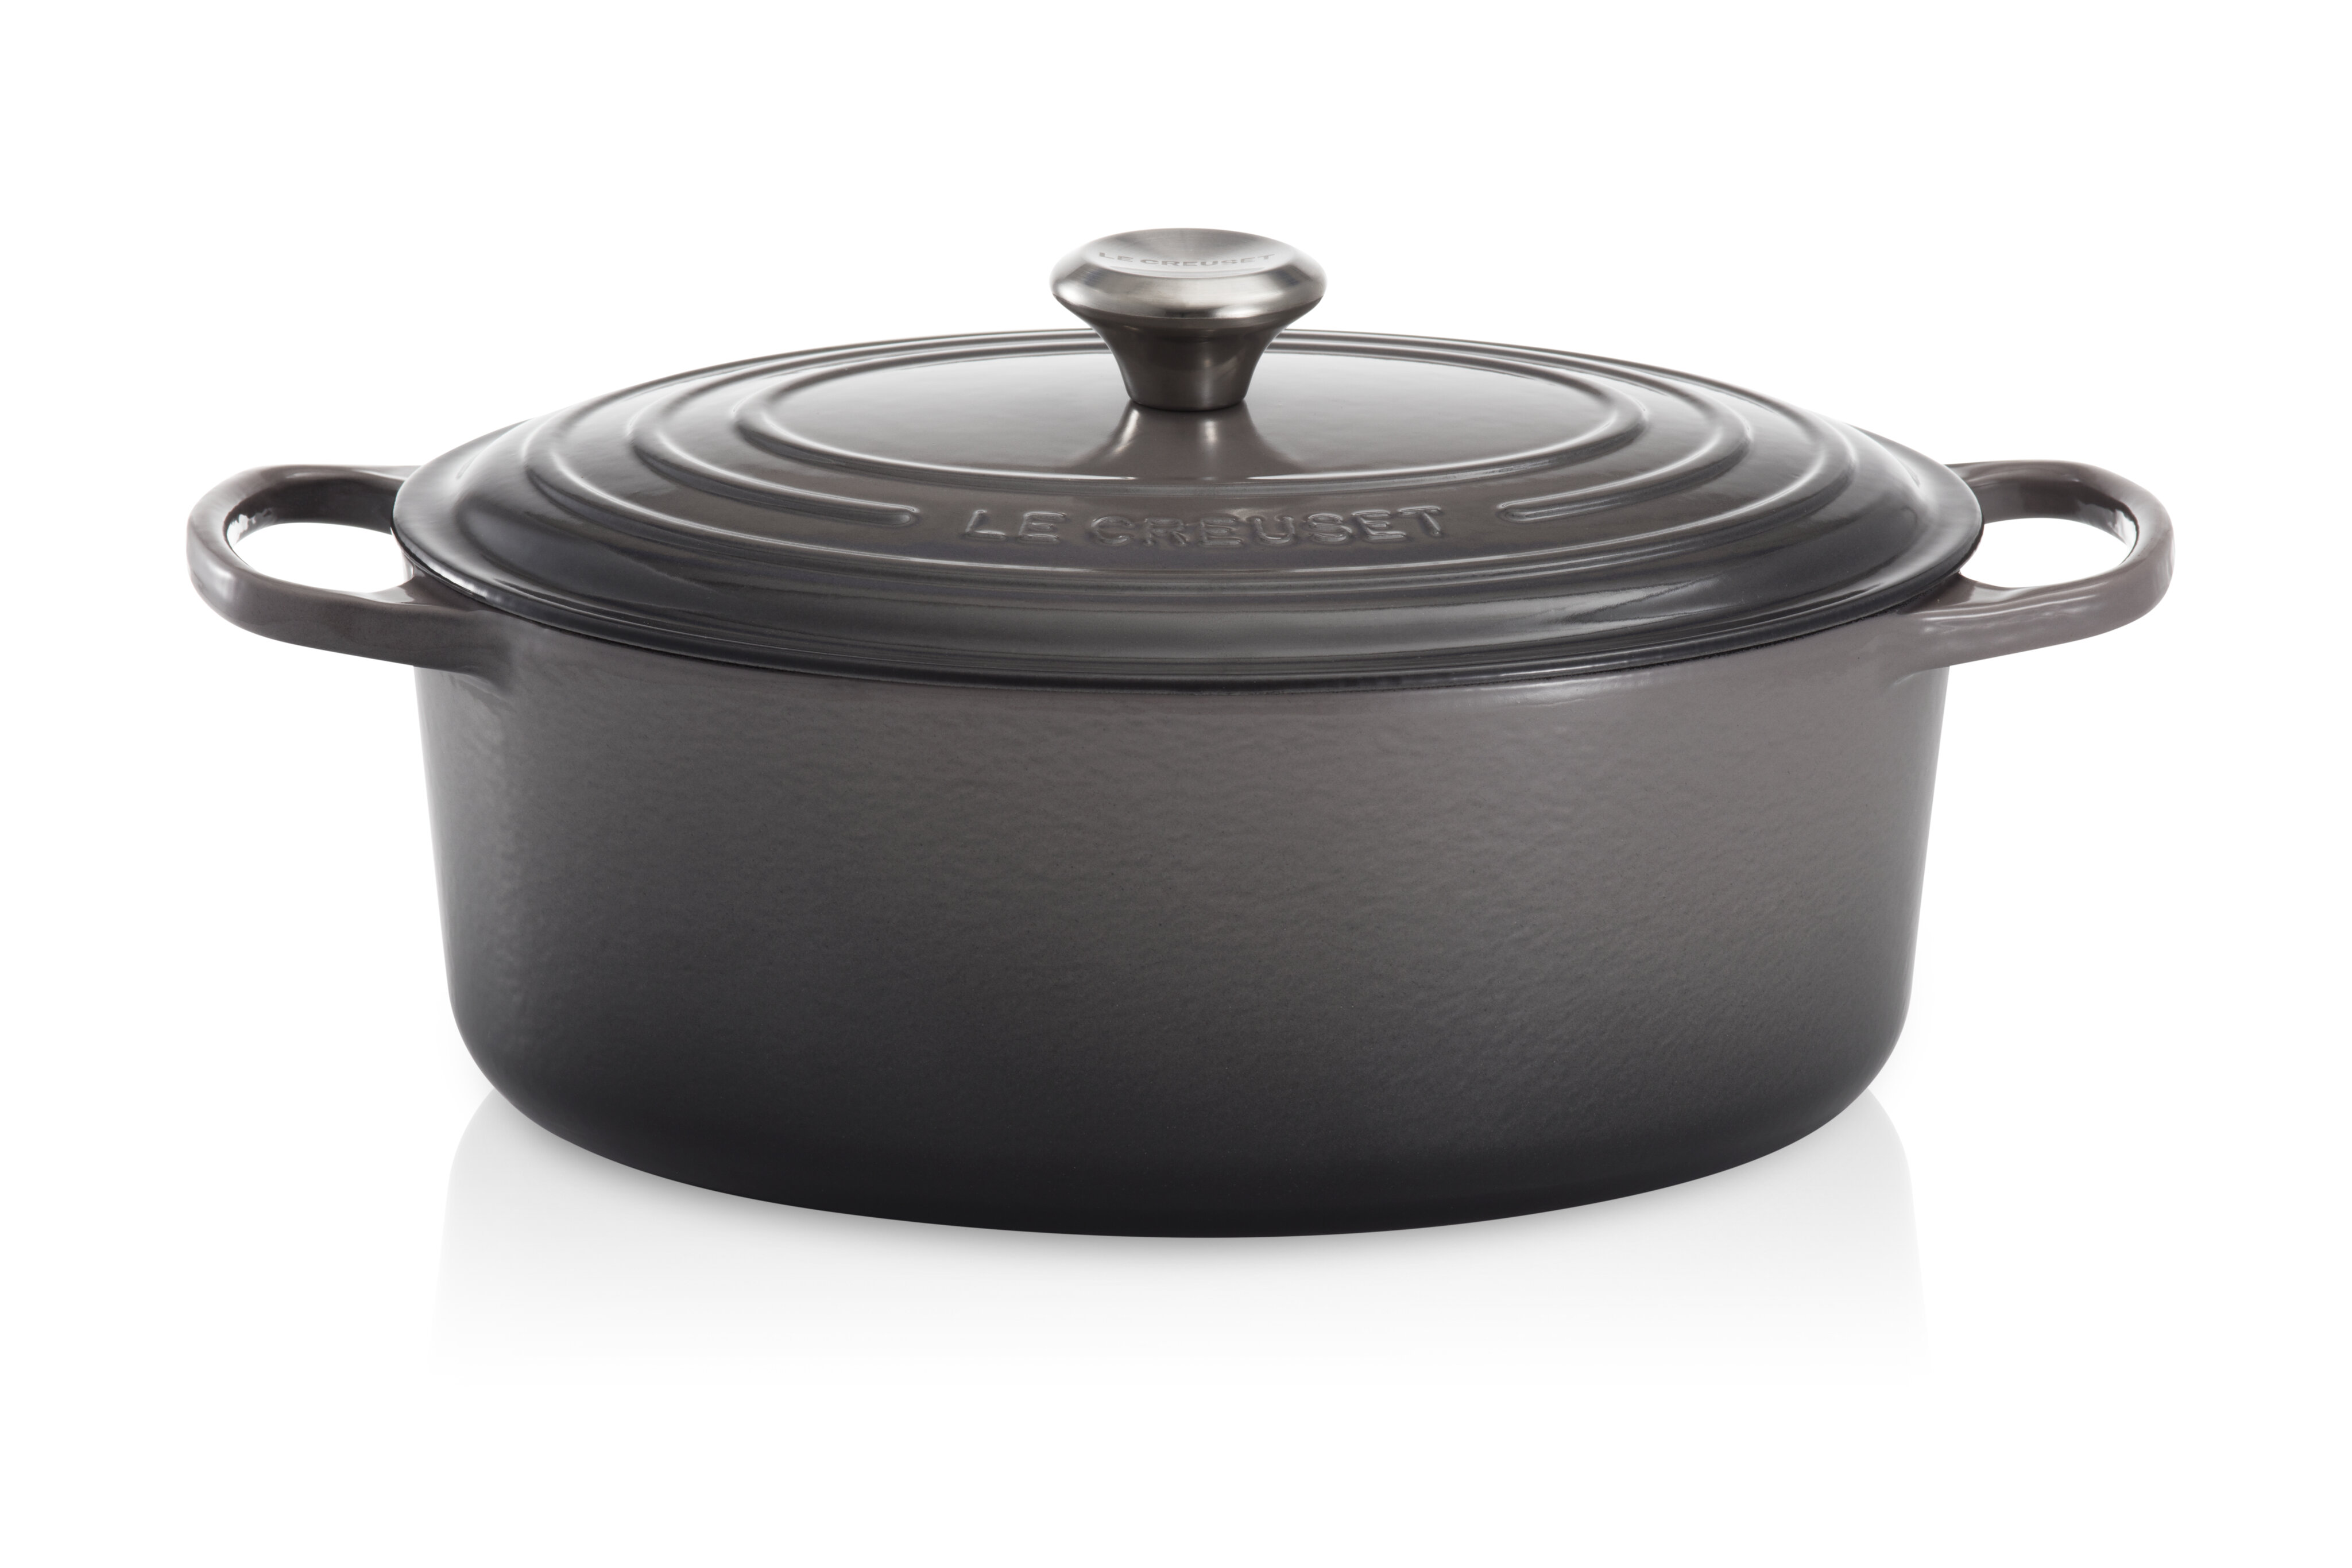 Le Creuset Enameled Cast Iron Oval Dutch Oven with Lid & Reviews